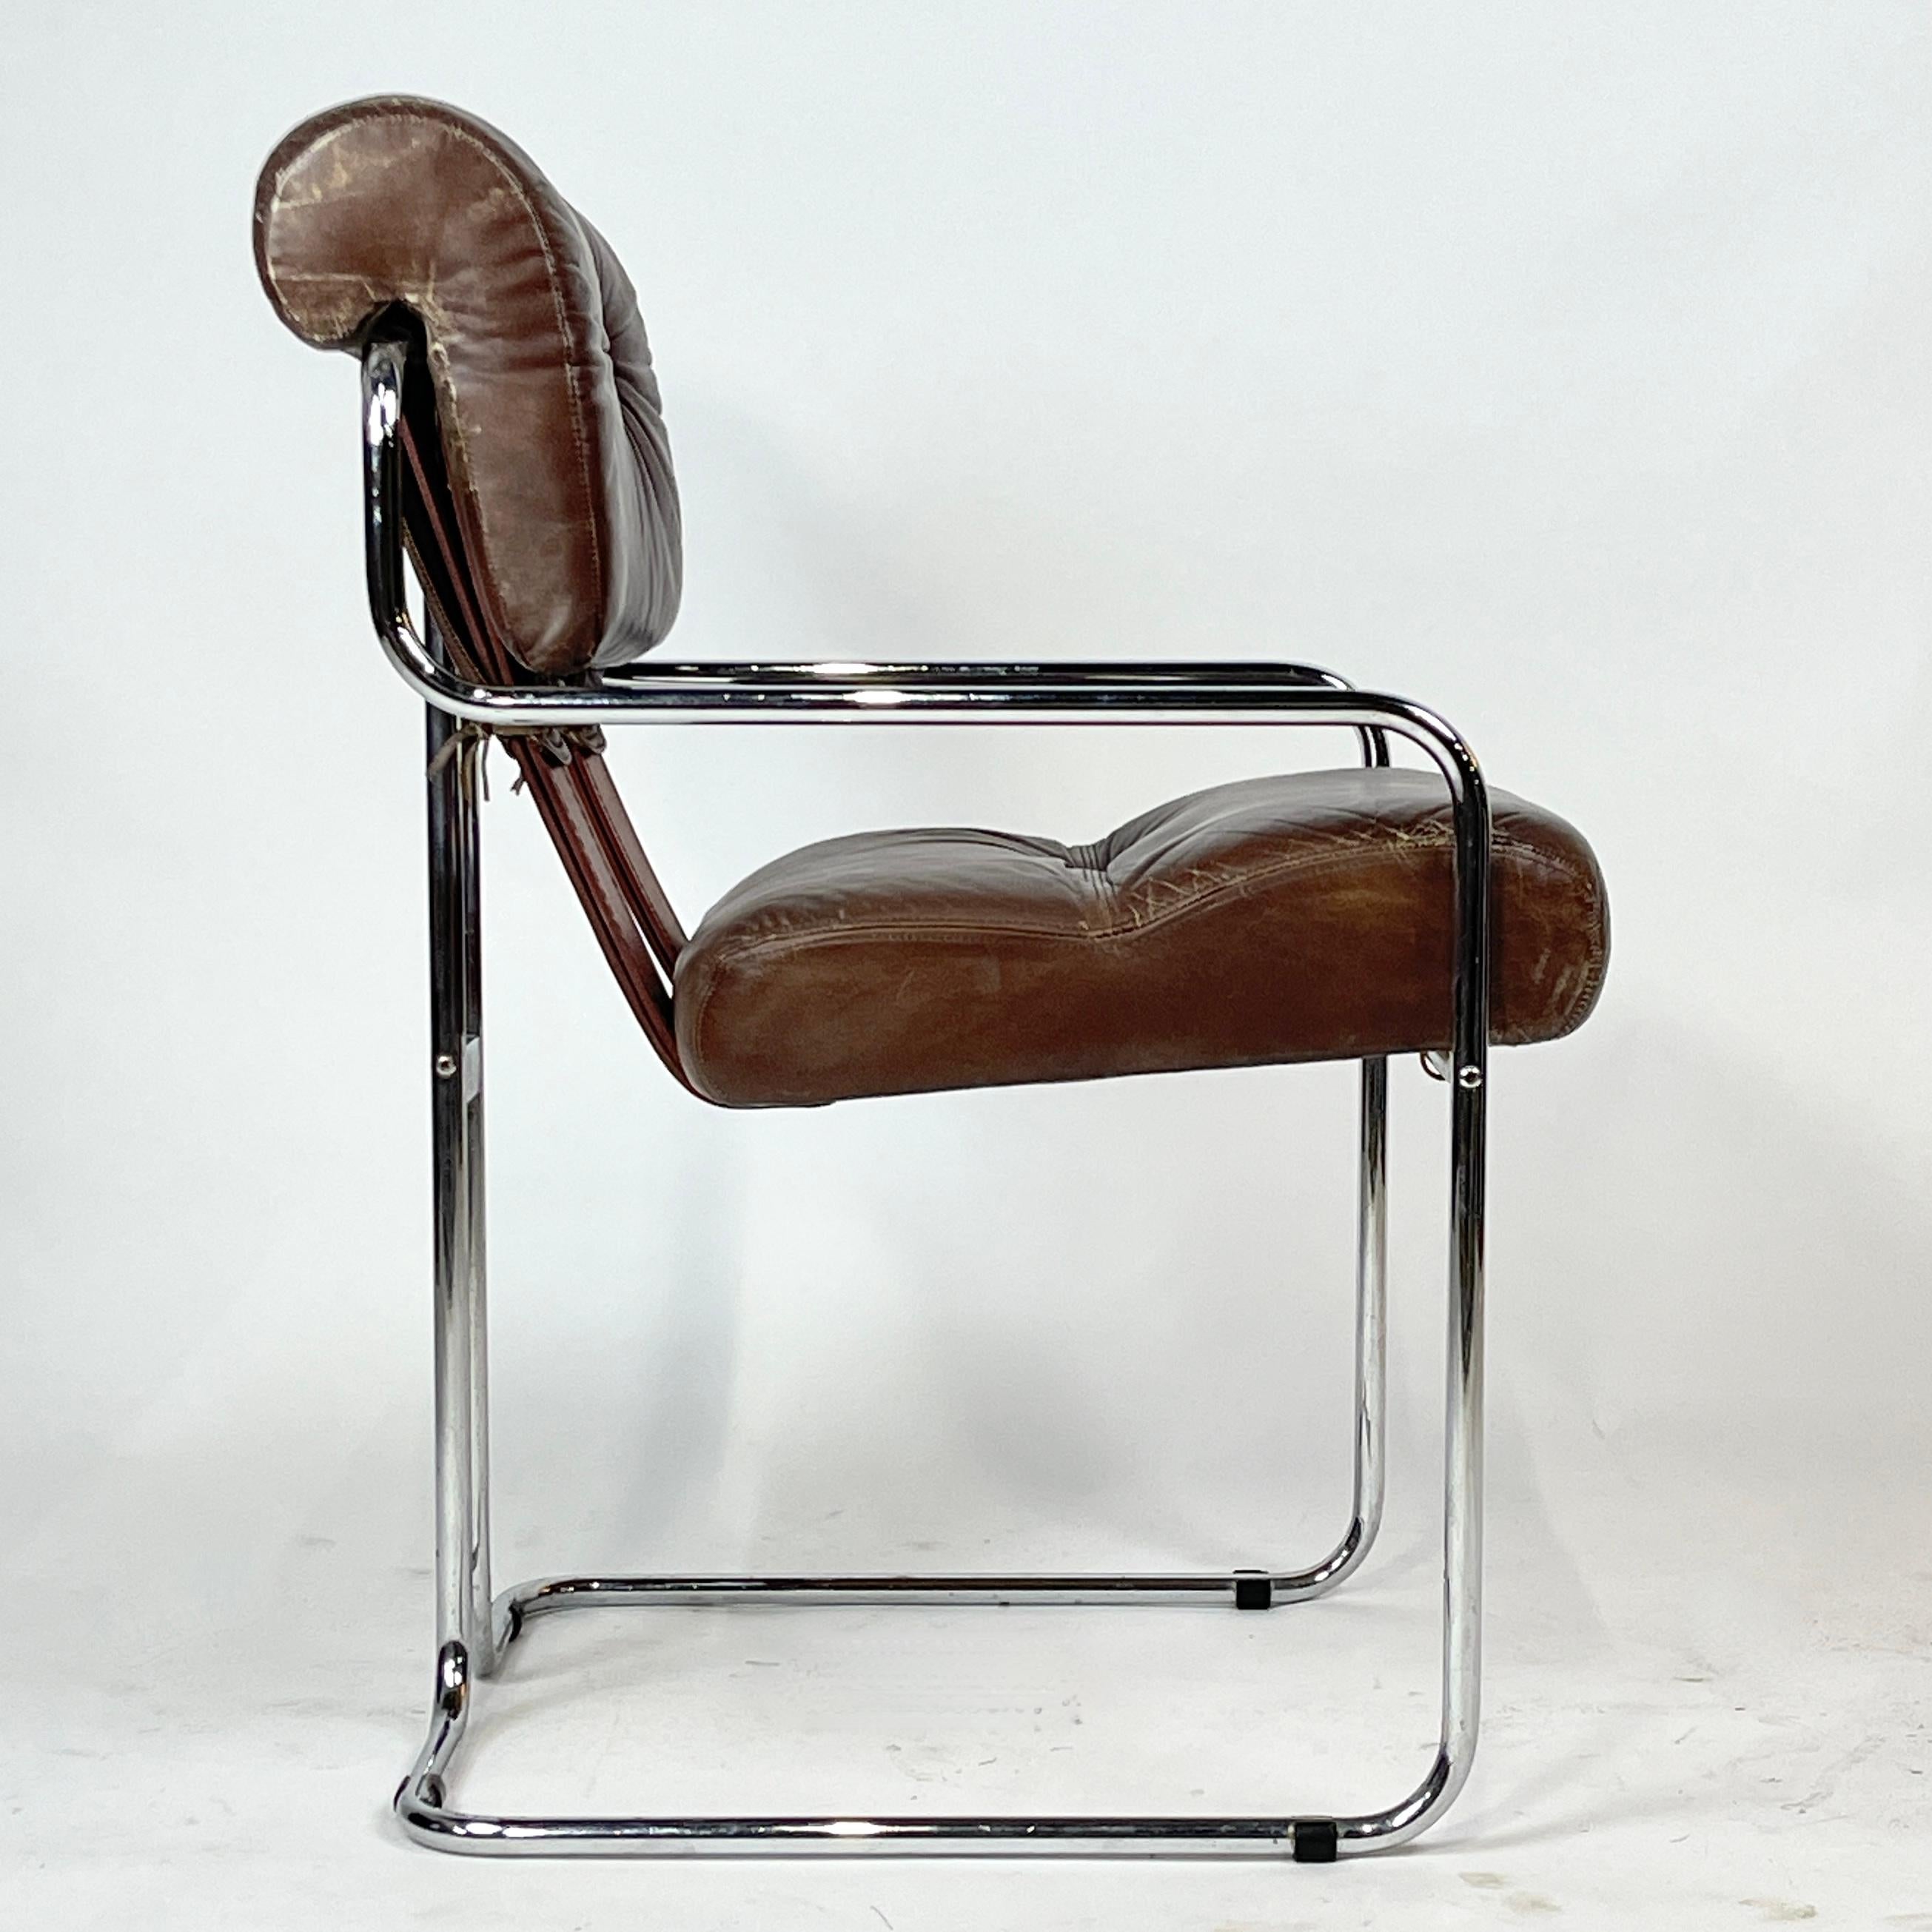 
Design: Guido Faleschini, 1971
The 'Tucroma' chair.
The simple lines of the frame enhance the craftsmanship of the stitched, tufted, and tied leather and saddle leather.

The frame is a chromed tubular steel  that gives the shape an effect of